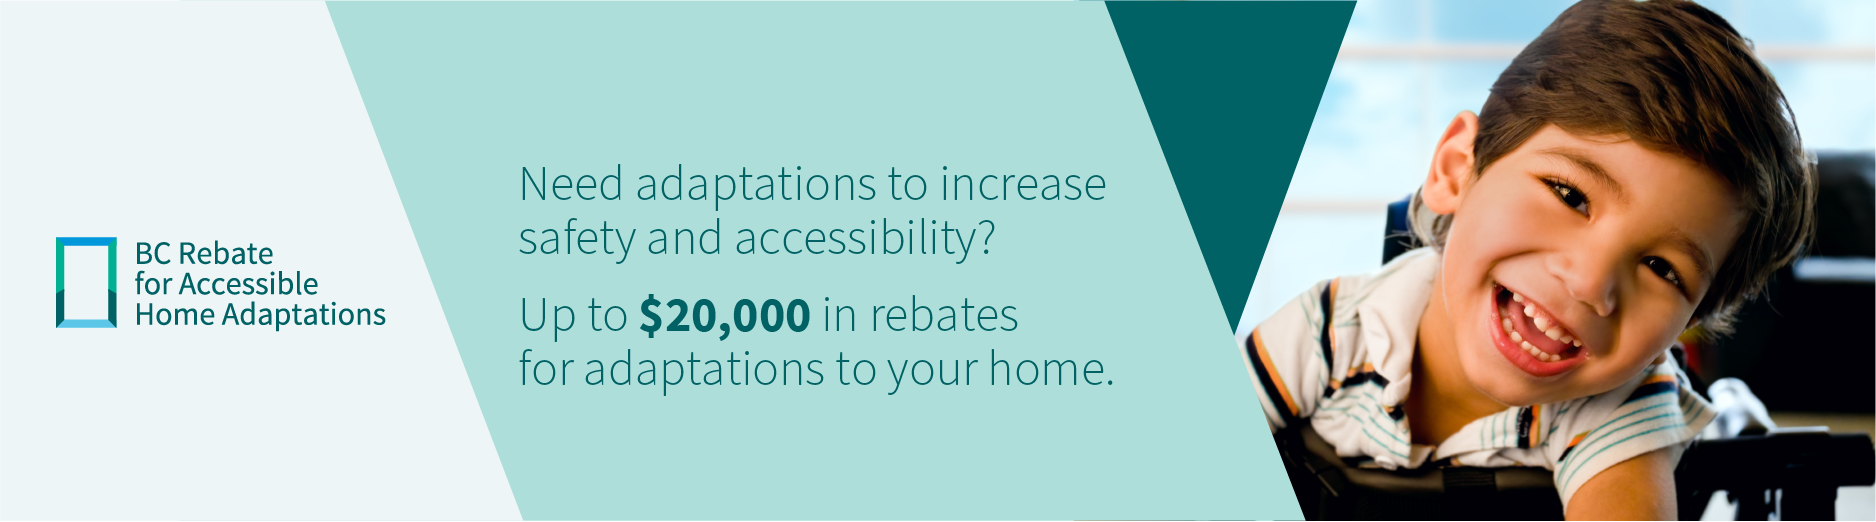 rebate-for-accessible-home-adaptations-bc-raha-program-overview